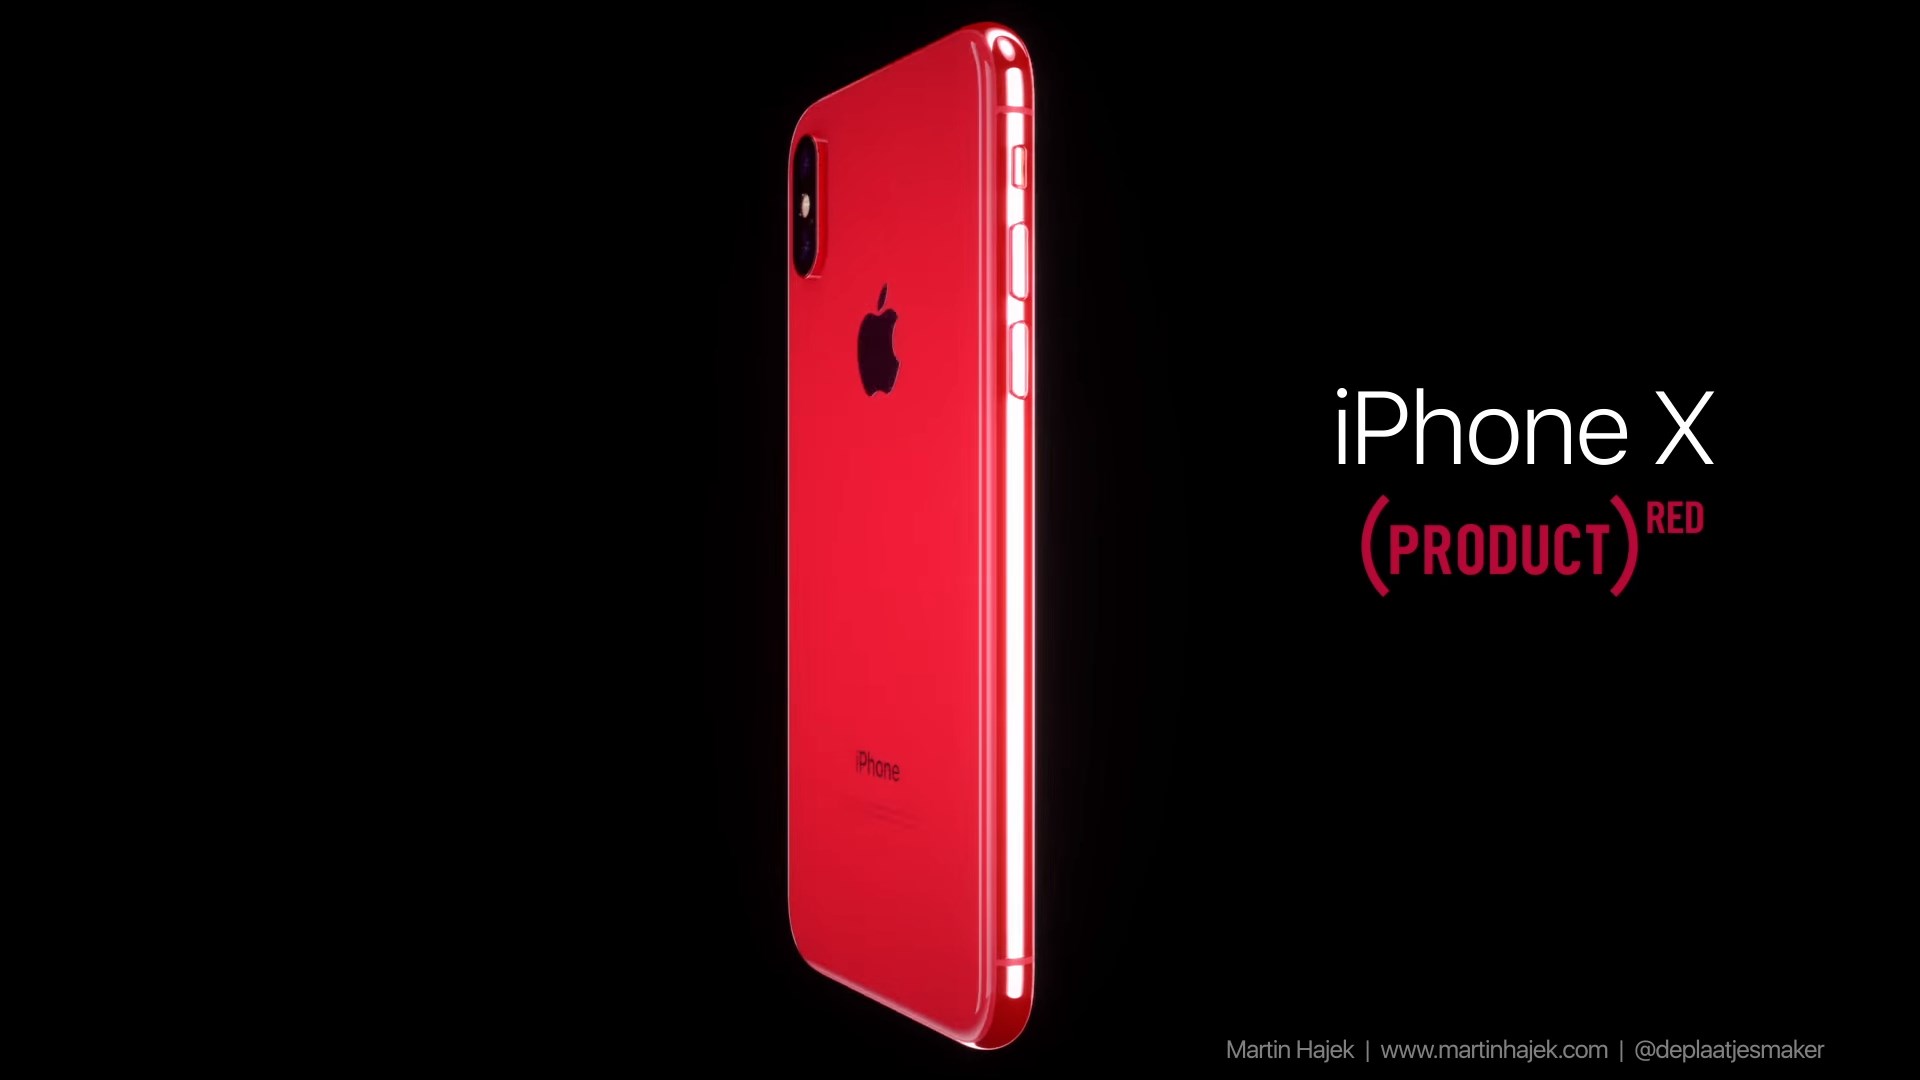 [Concept] Voici l’ iPhone X (Product) RED !